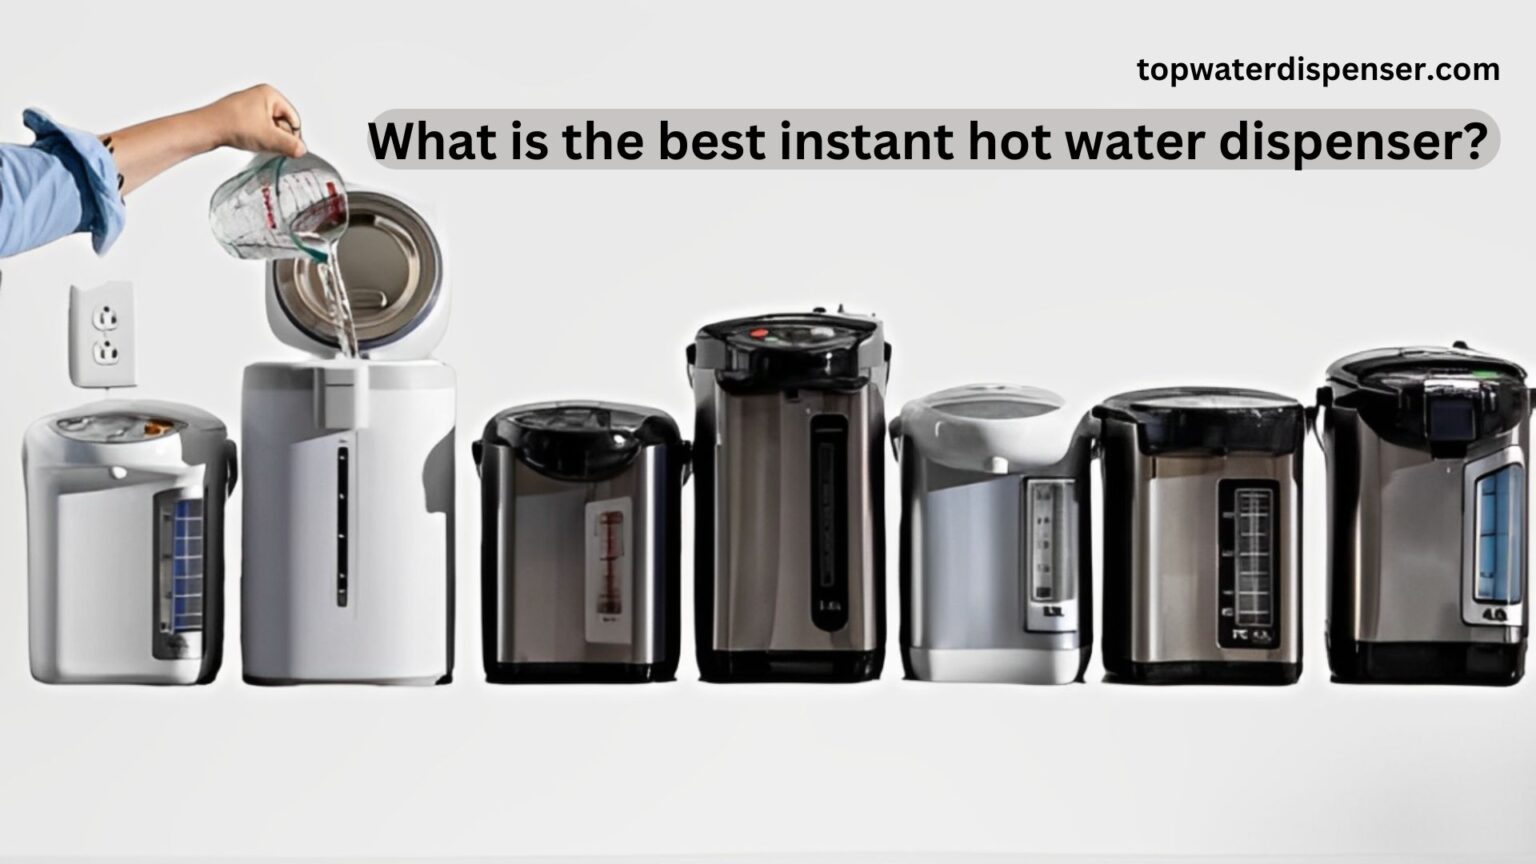 What is the best instant hot water dispenser?